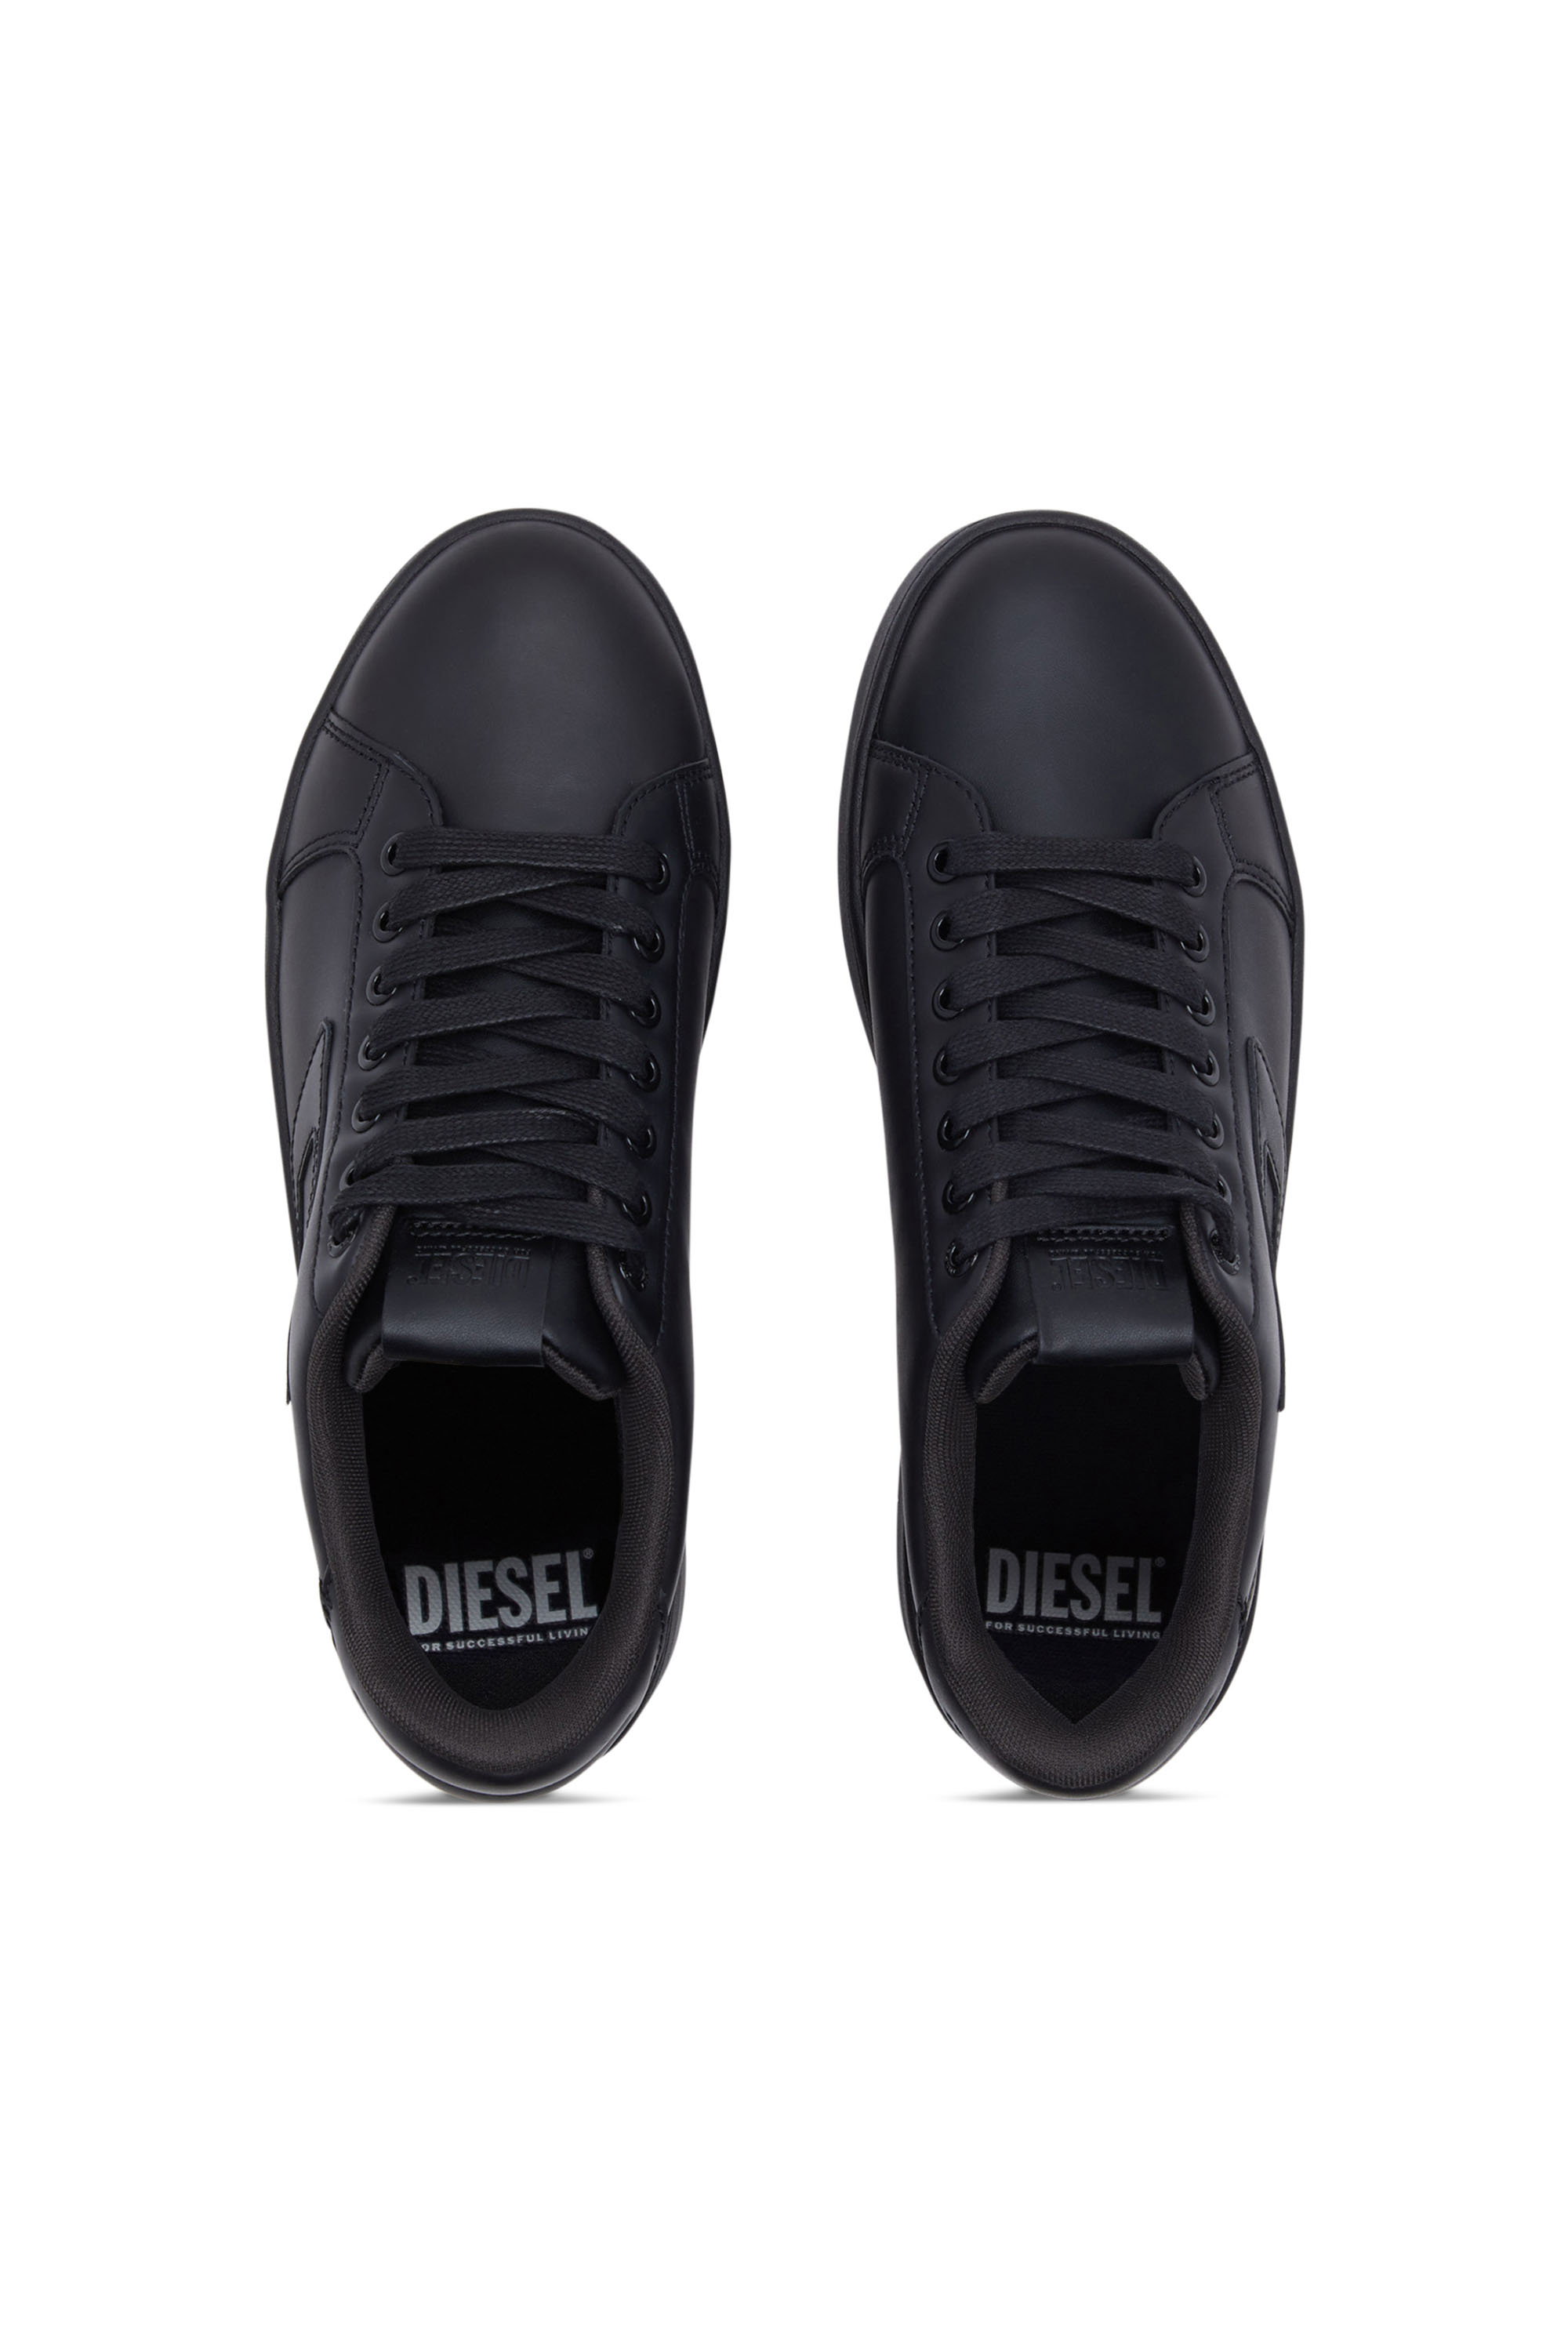 Diesel - S-ATHENE BOLD X, Female S-Athene Bold-Flatform sneakers in leather in Black - Image 5